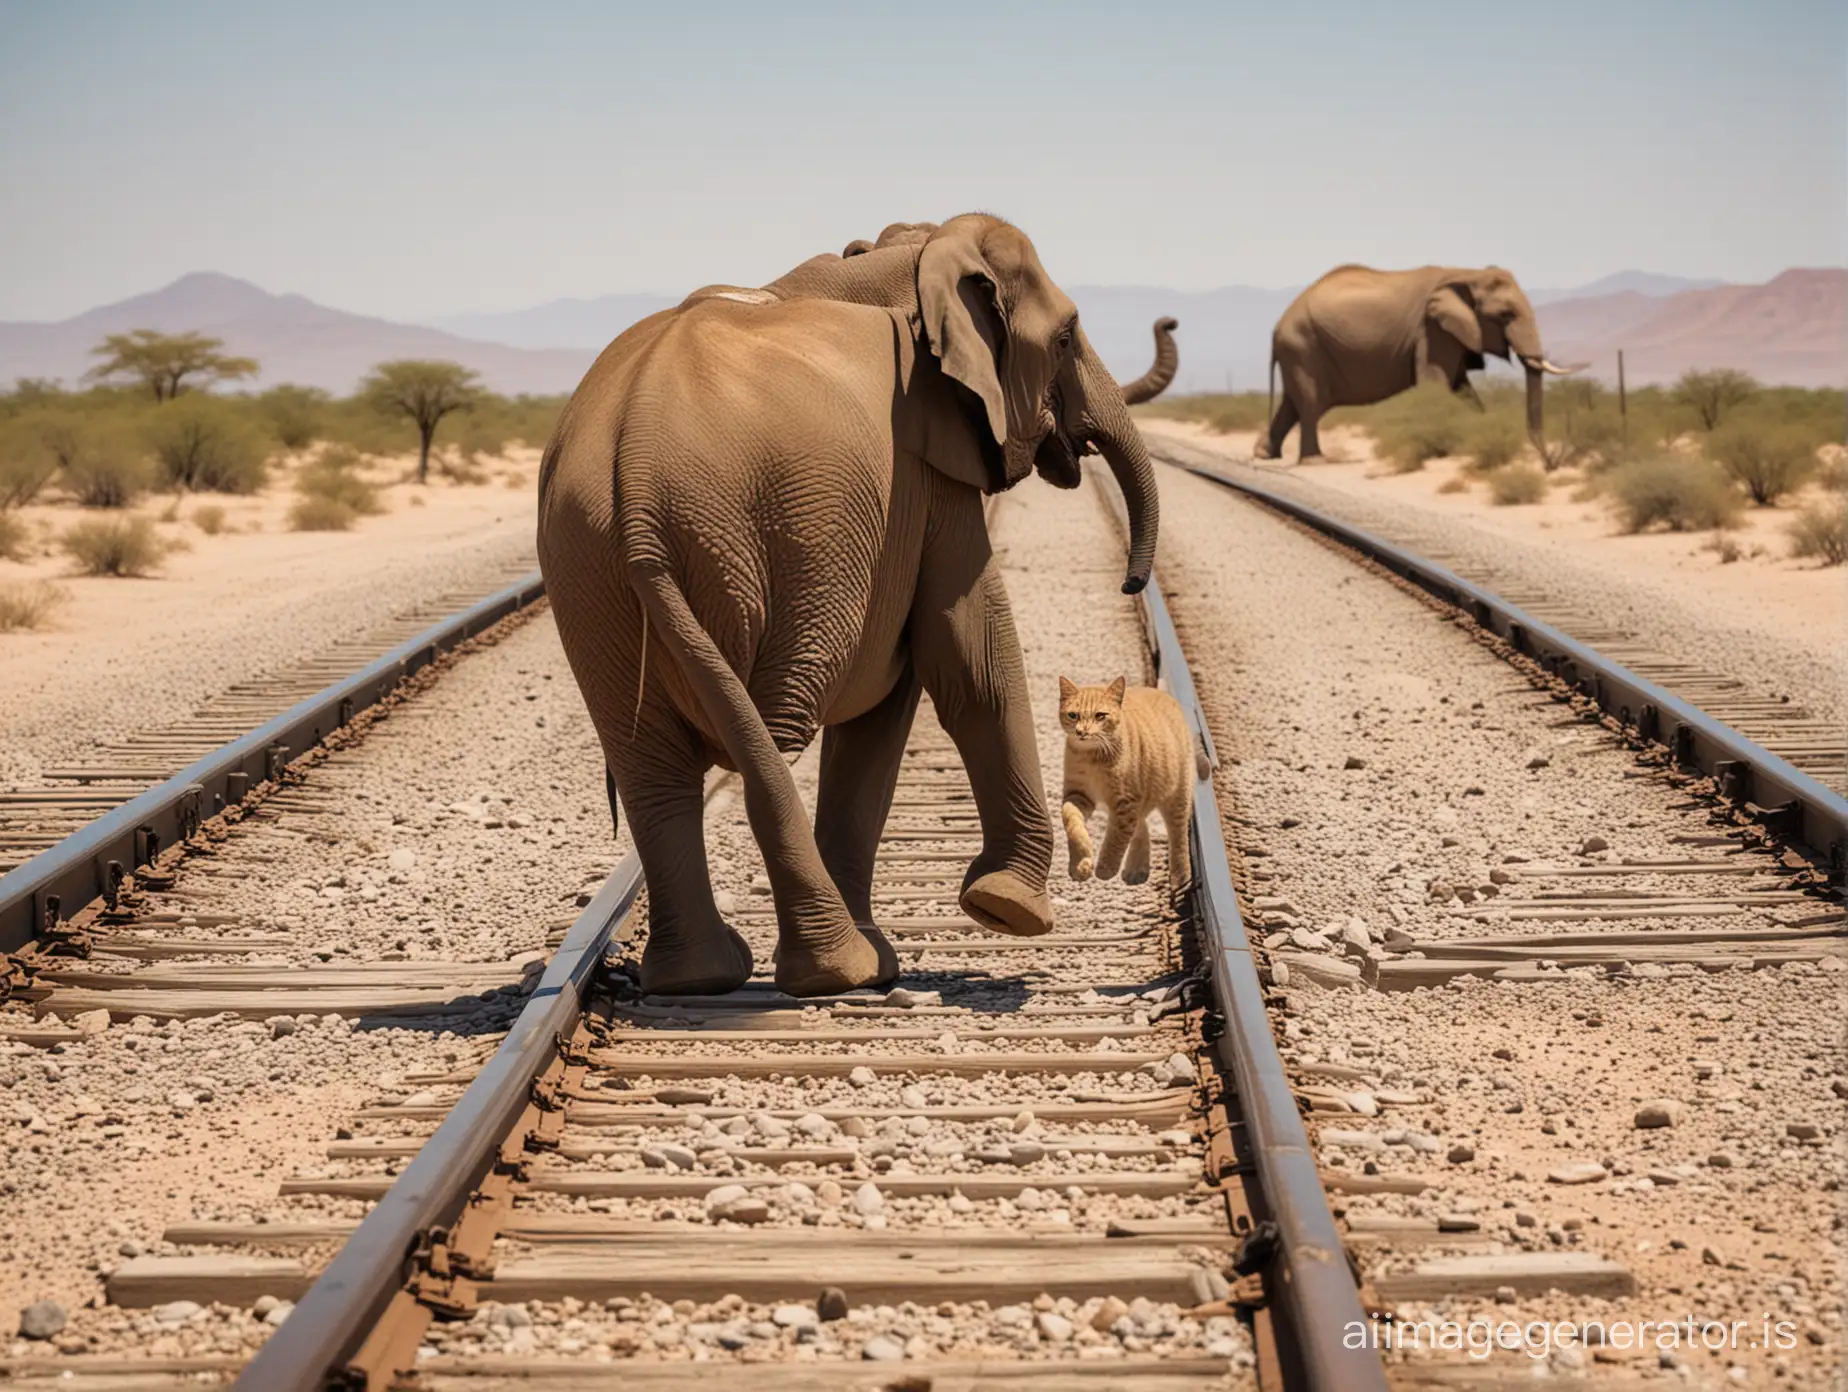 cat chasing an elephant on railroad tracks in desert during day.